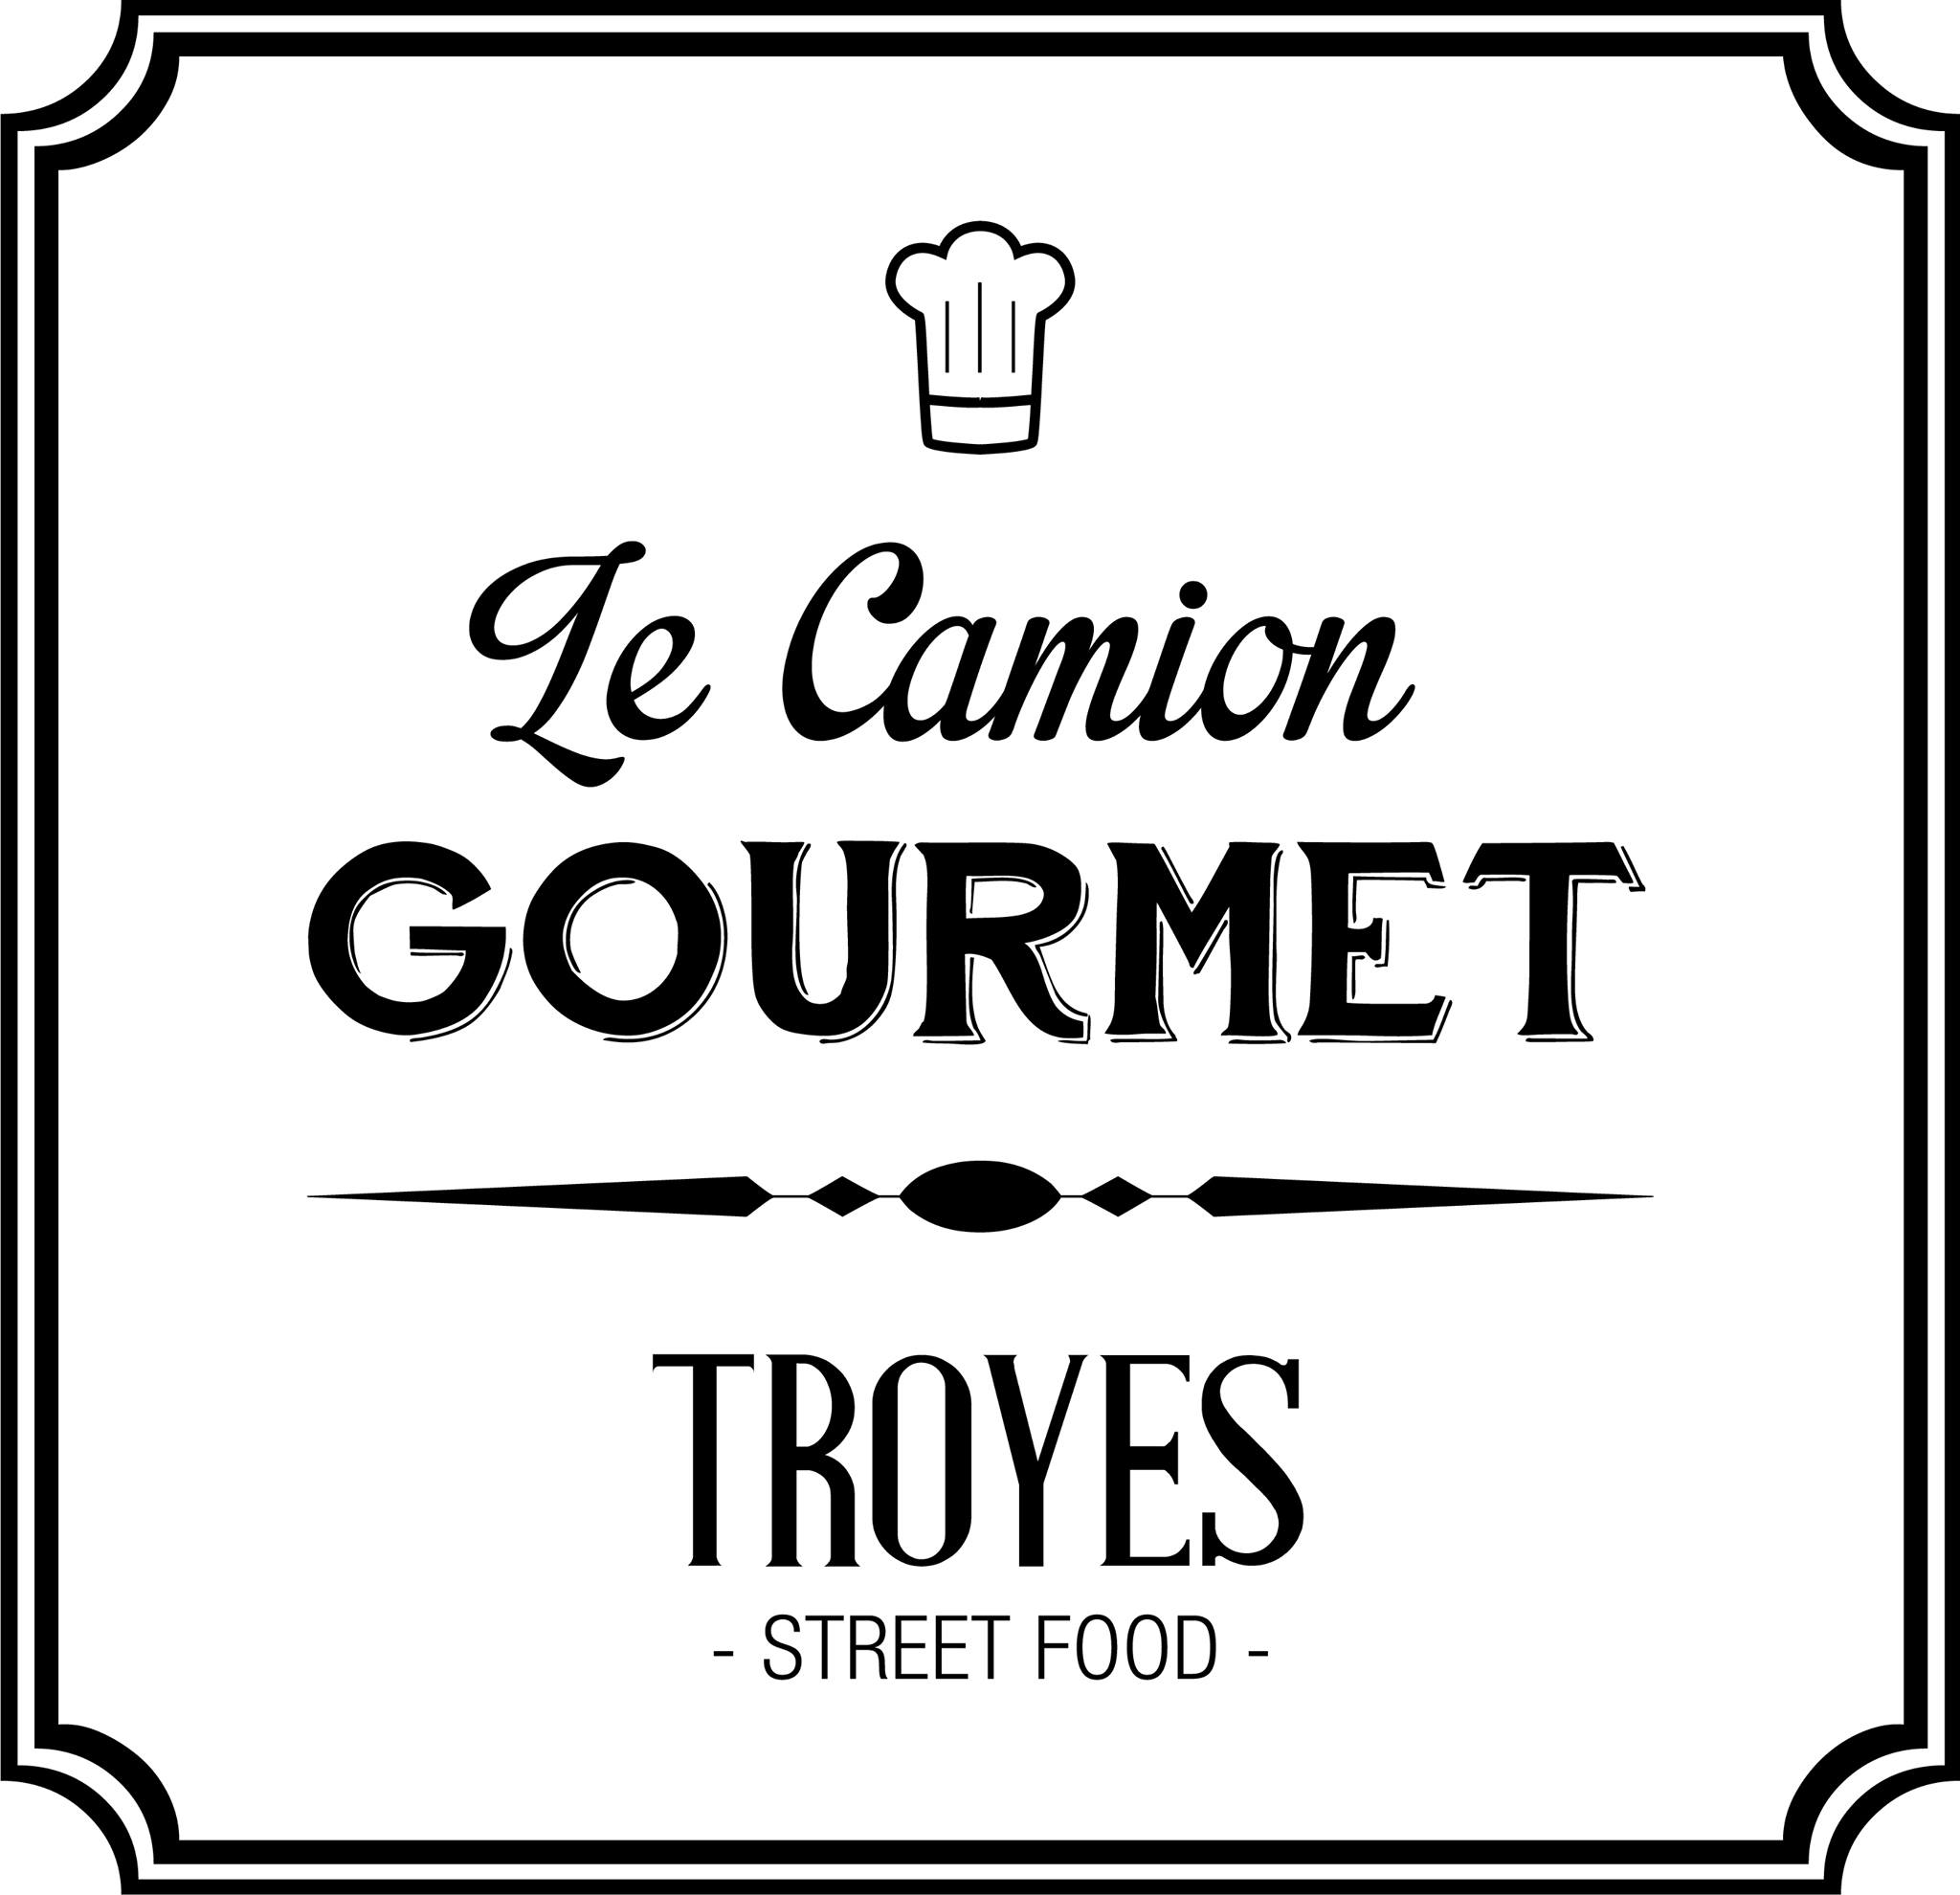 Food Truck Le Camion Gourmet